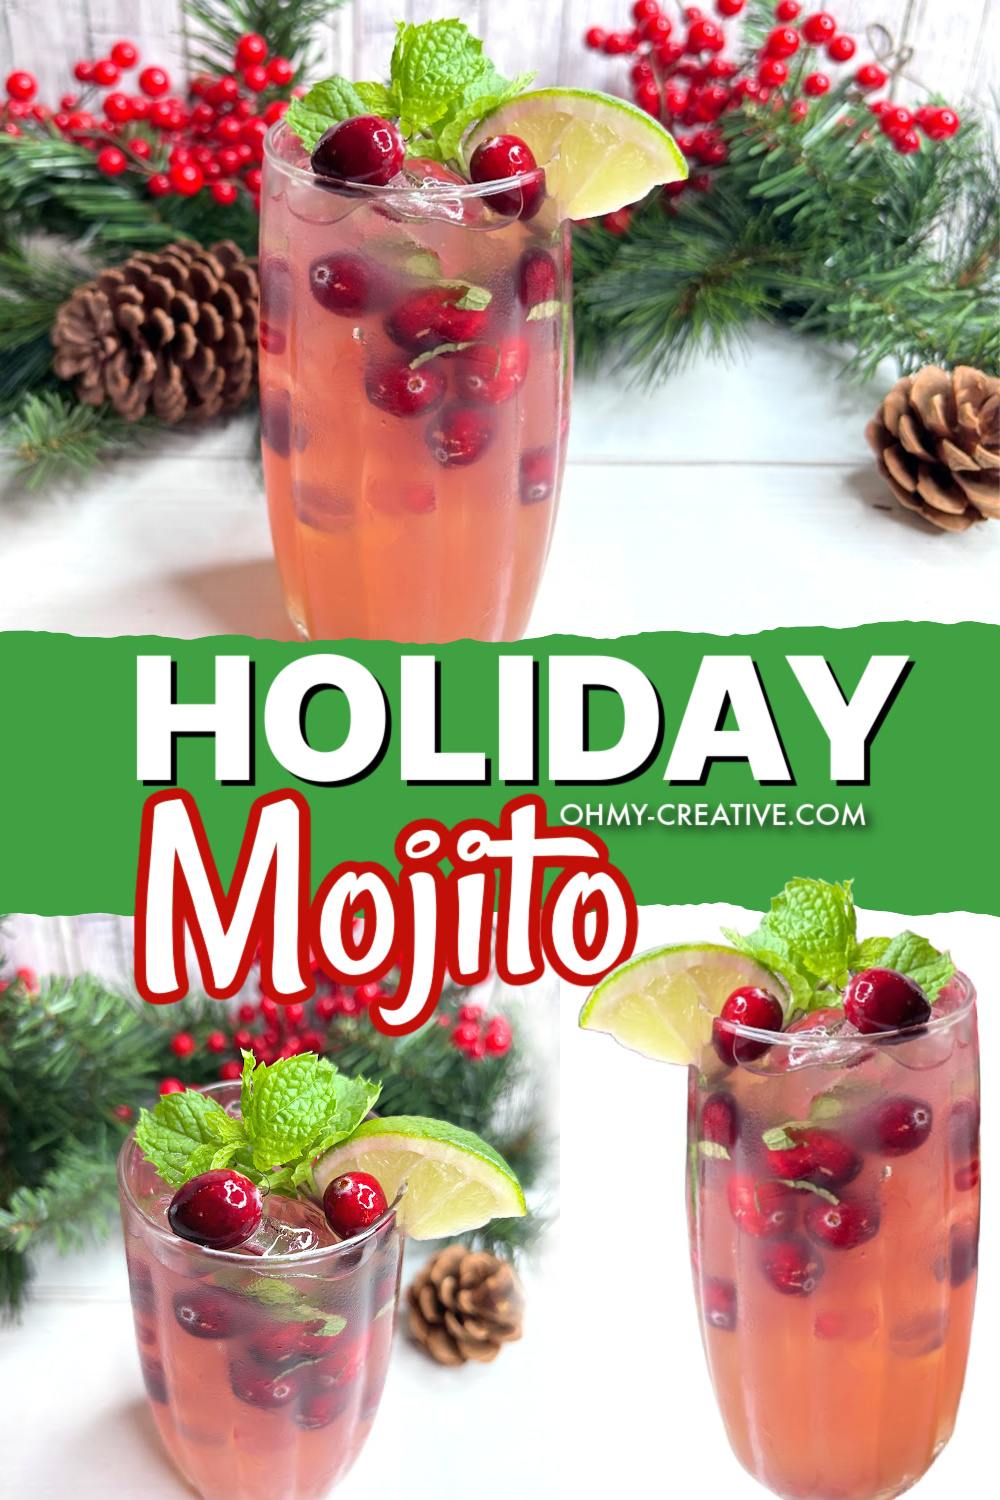 A pinterest double image with a holiday mojito garnished with cranberries, mint and a wedge of lime. Winter greens are seen in the background.